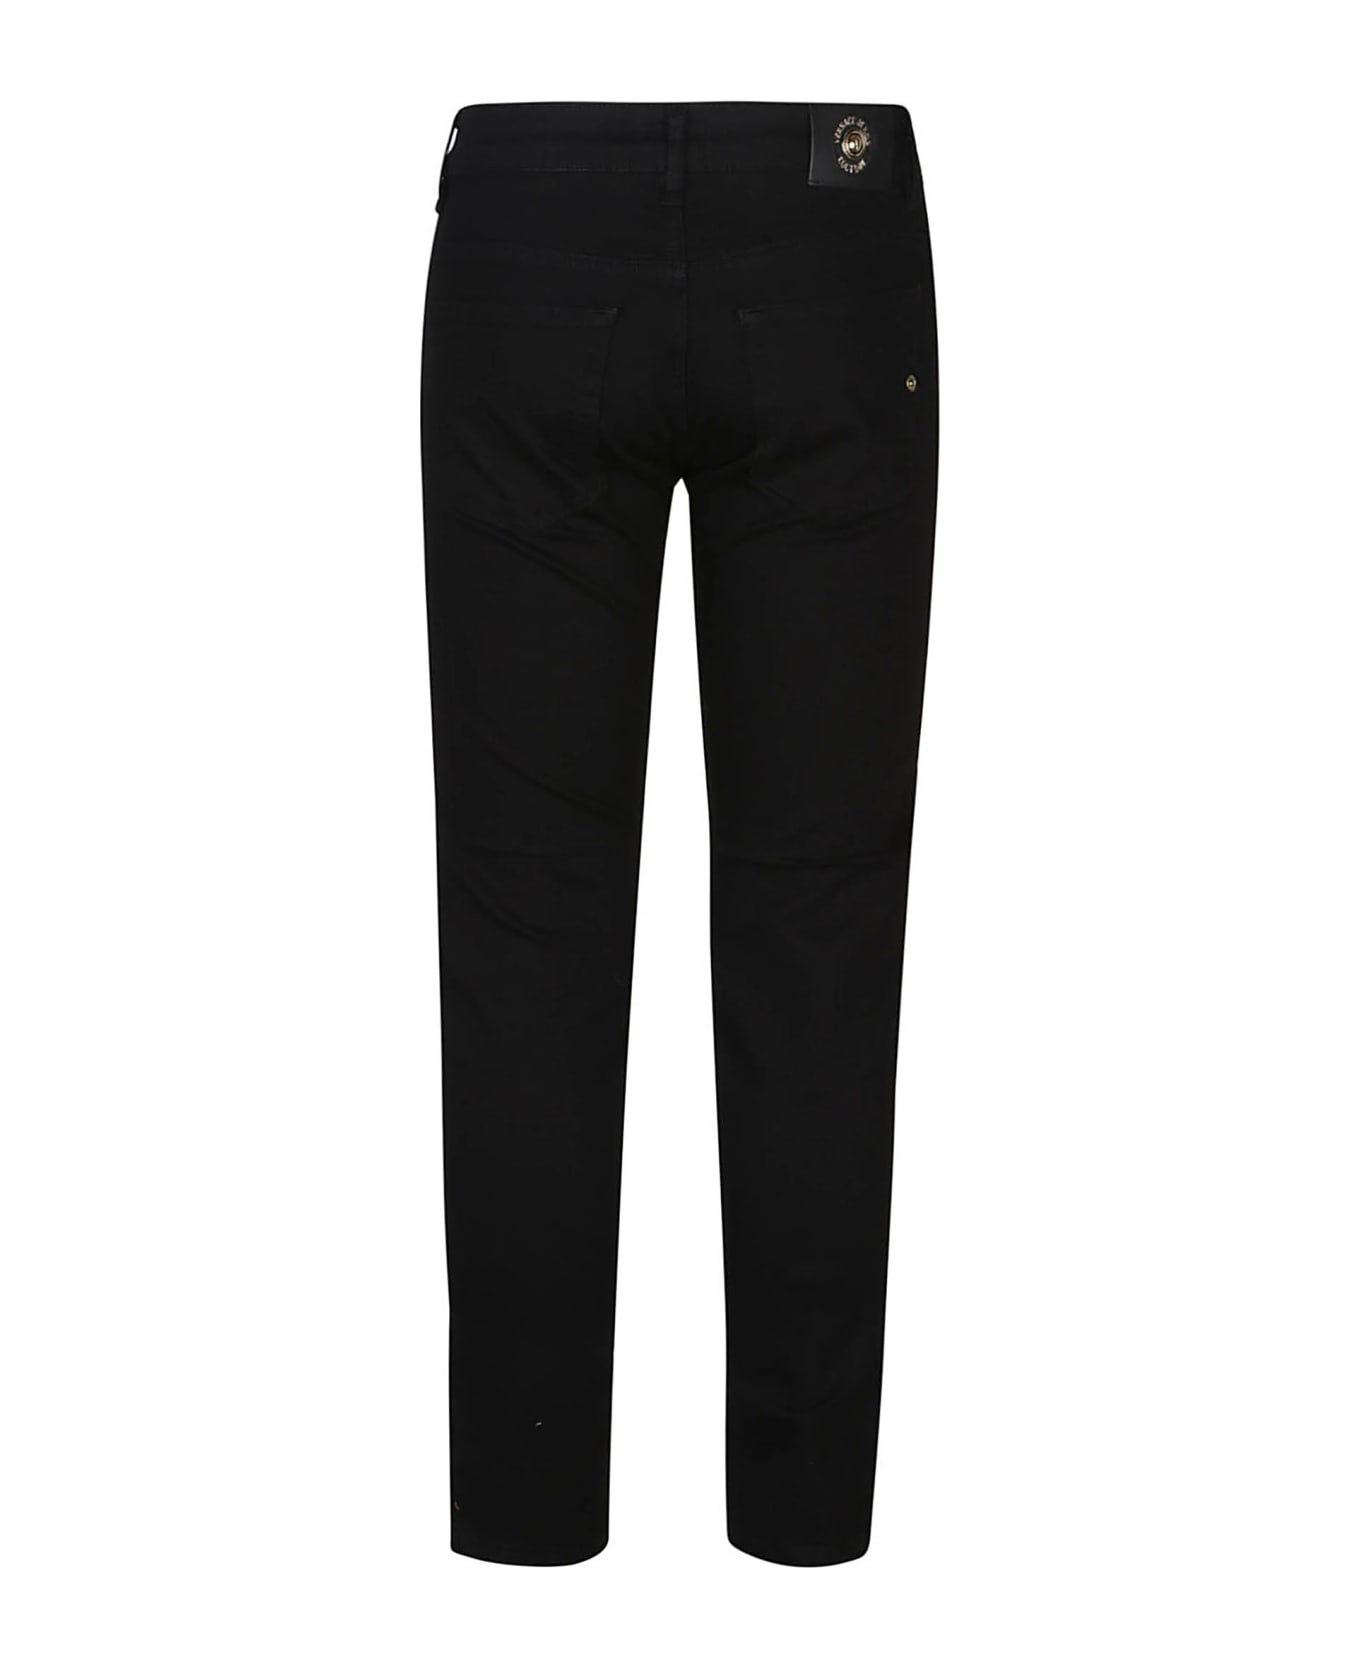 Versace Jeans Couture Narrow Dundee 5 Pockets Jeans - Black/black ボトムス